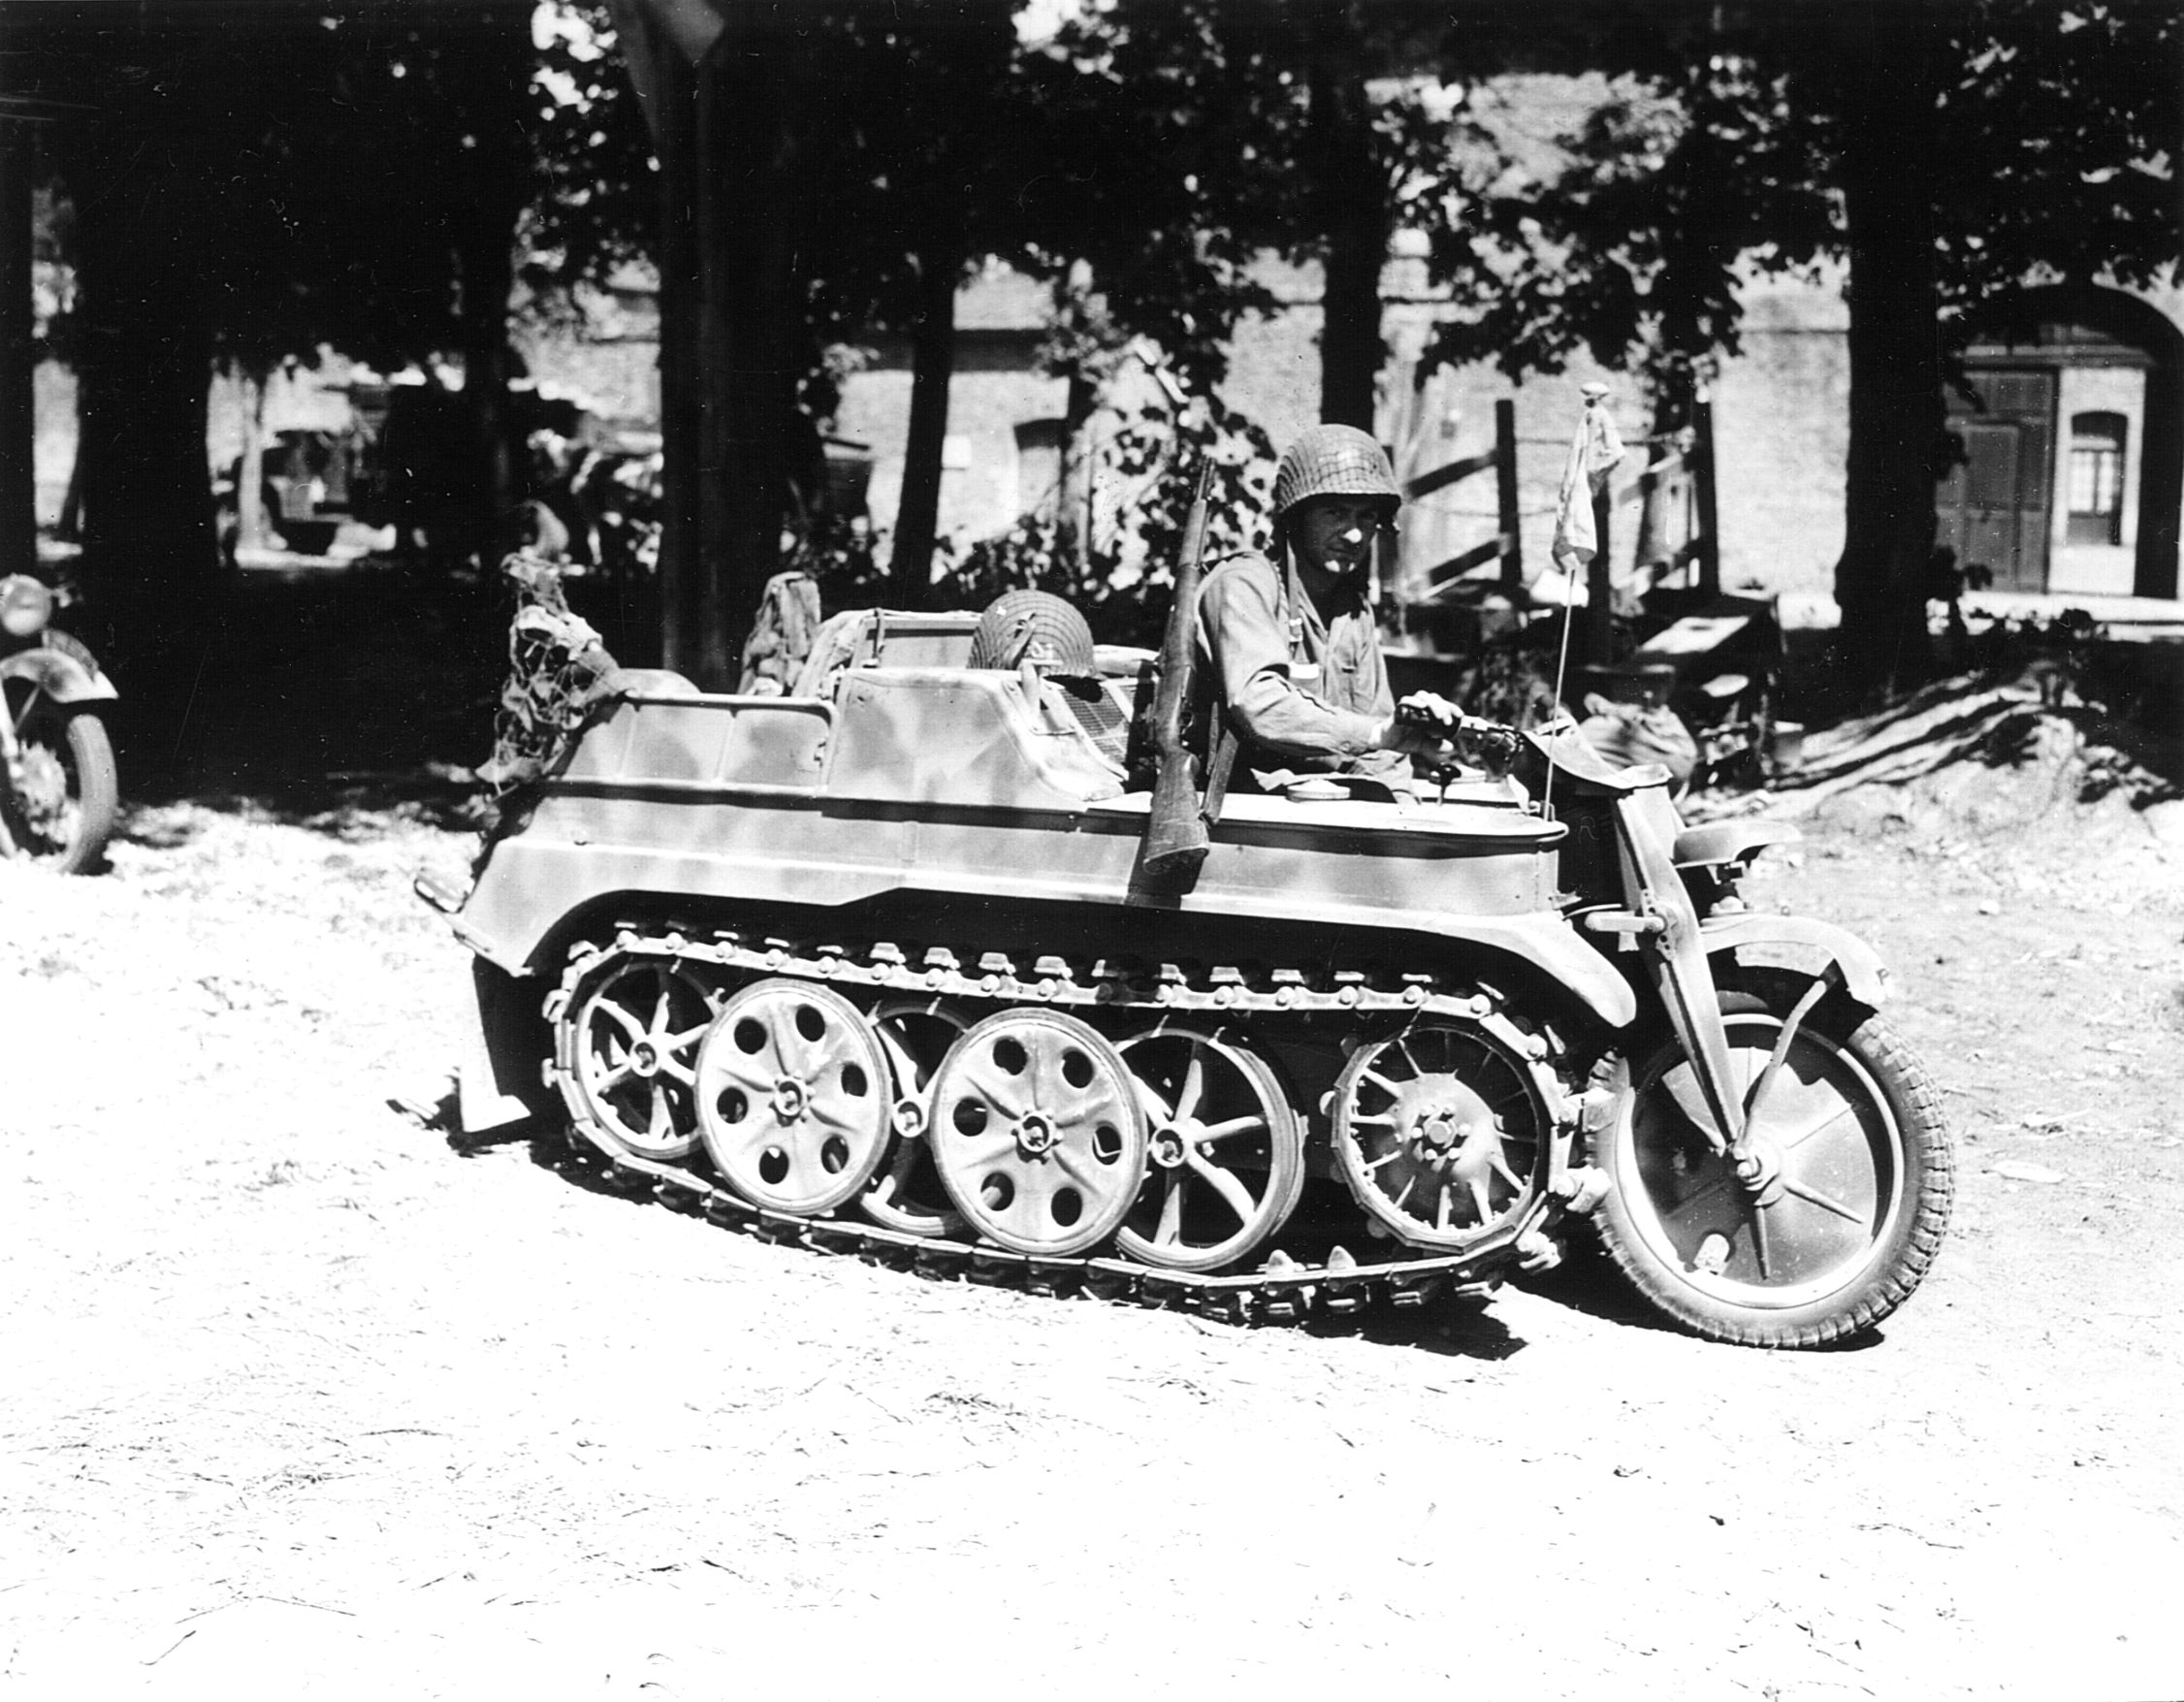 A paratrooper with the 101st Airborne Division tries out a German half-track motorcycle, known as a kettenkrad, in Carentan, France.